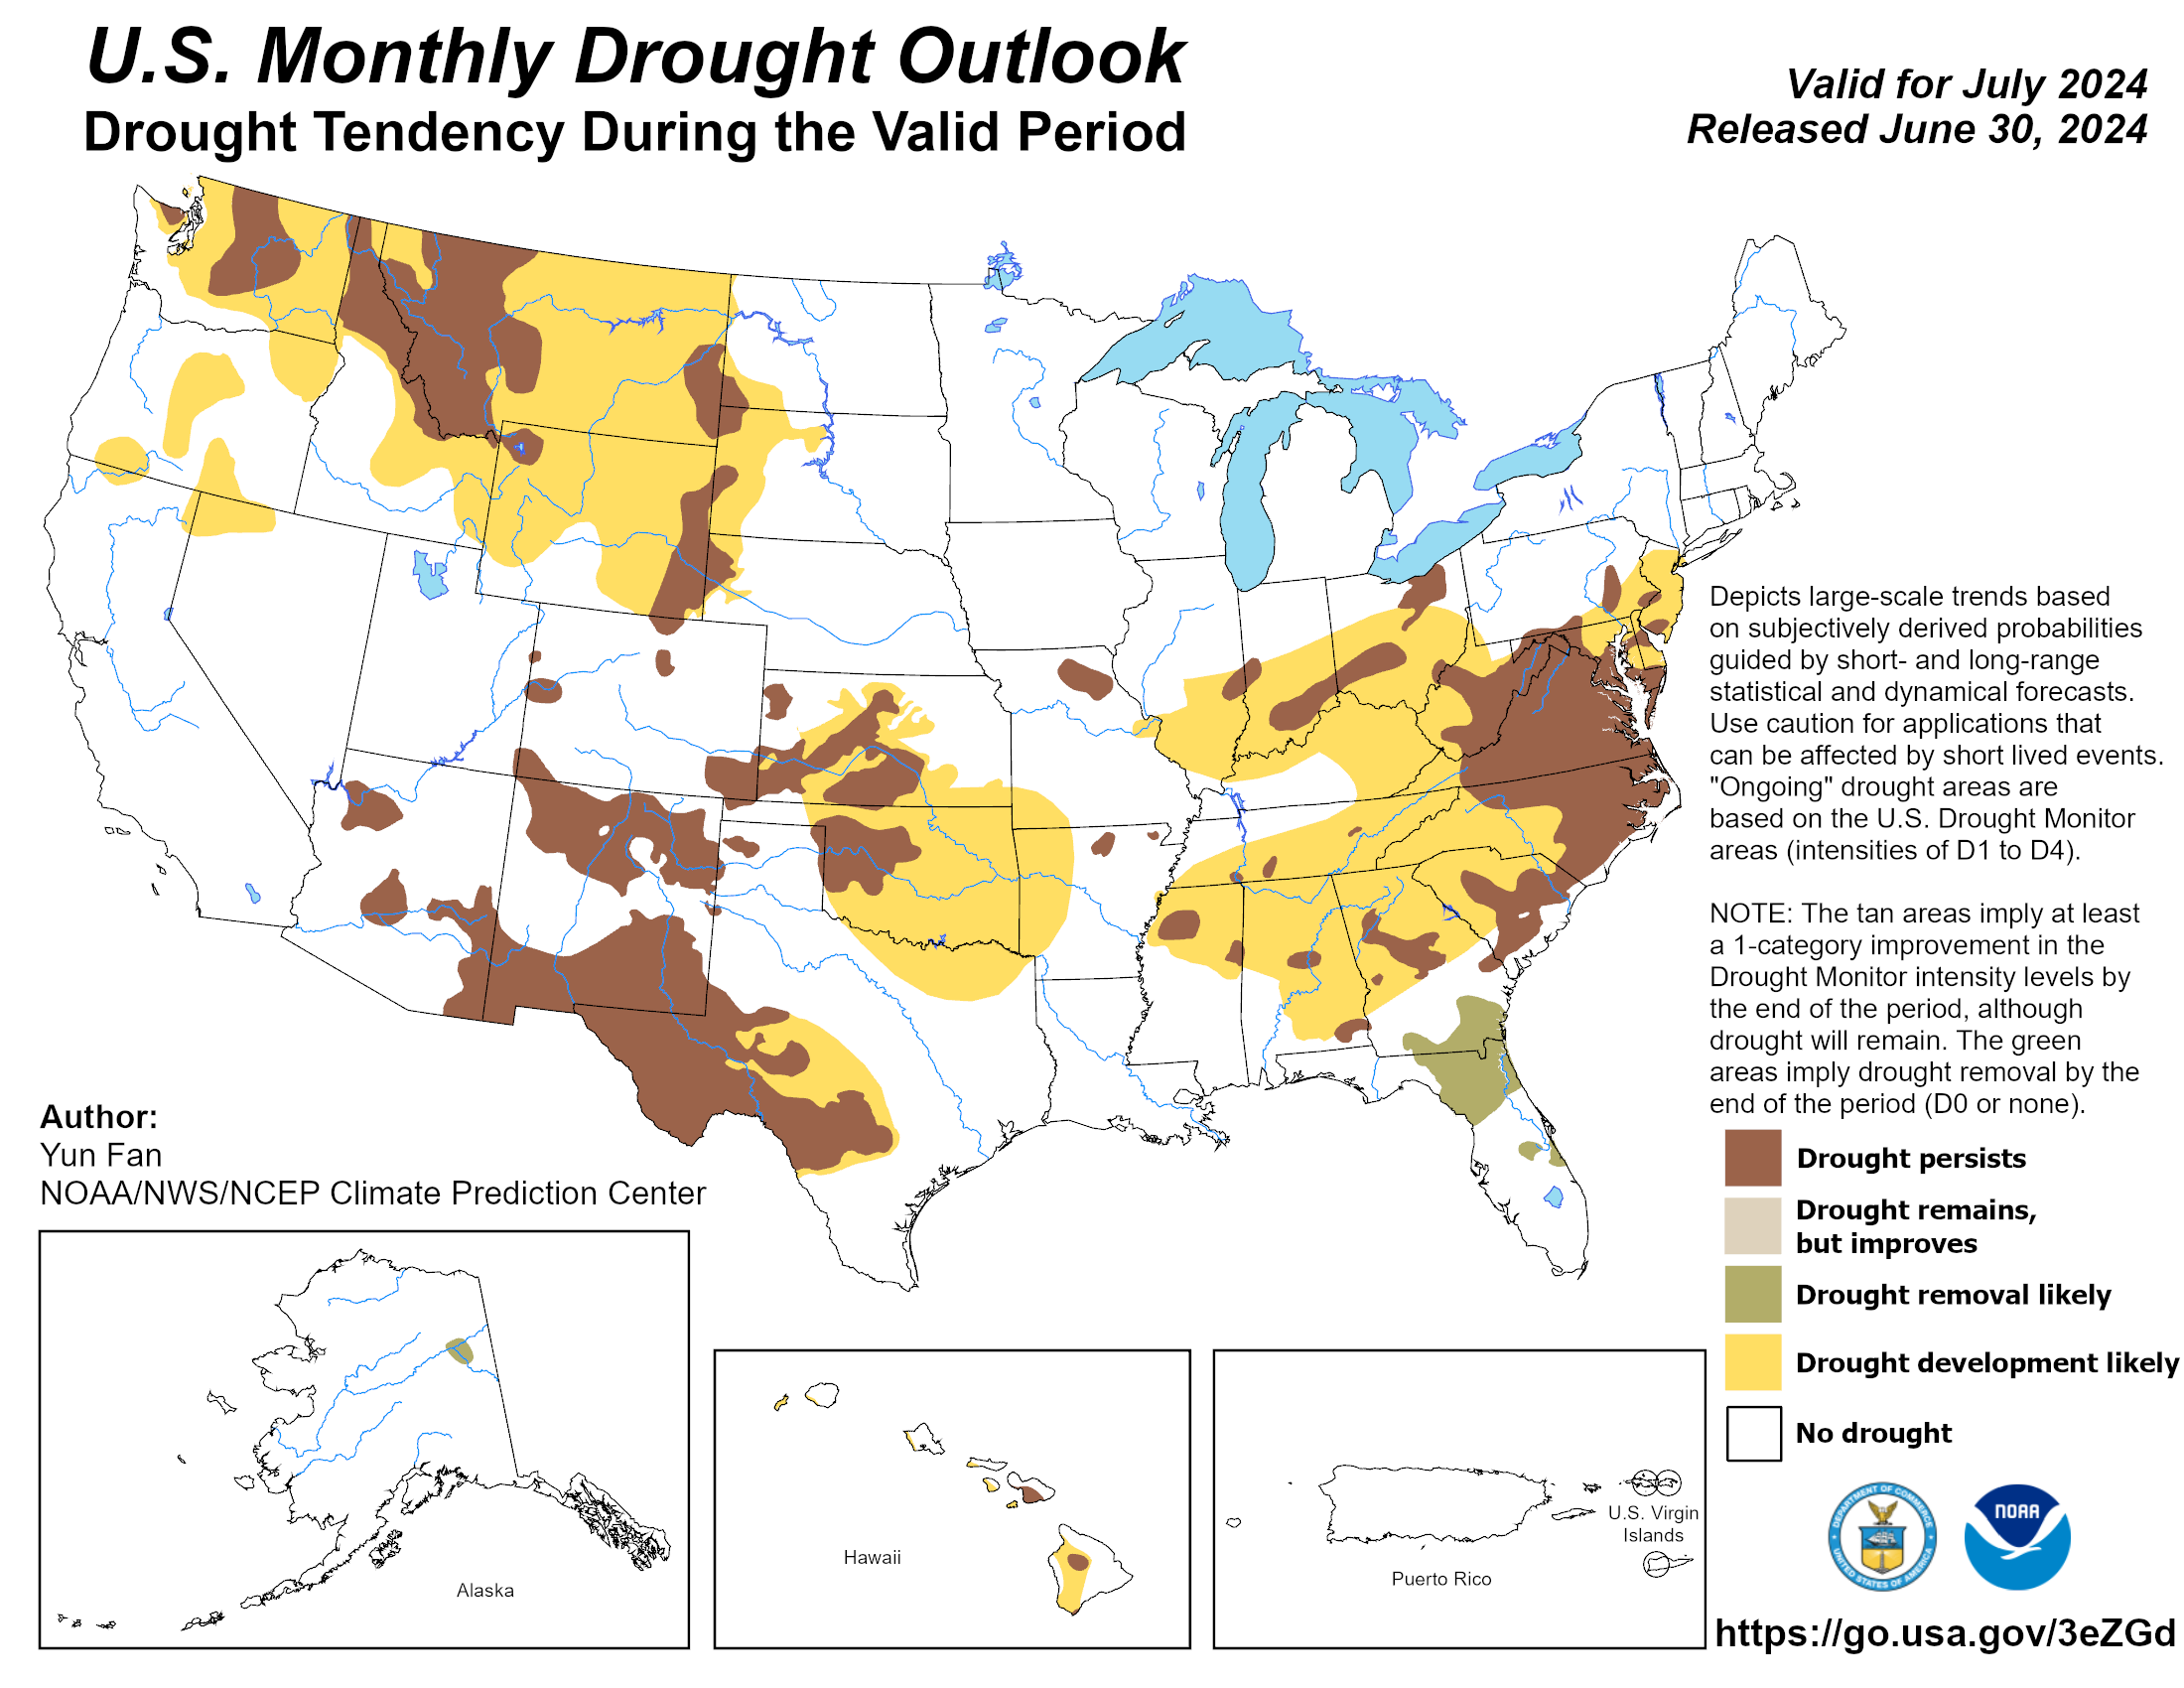 https://www.cpc.ncep.noaa.gov/products/expert_assessment/month_drought.png